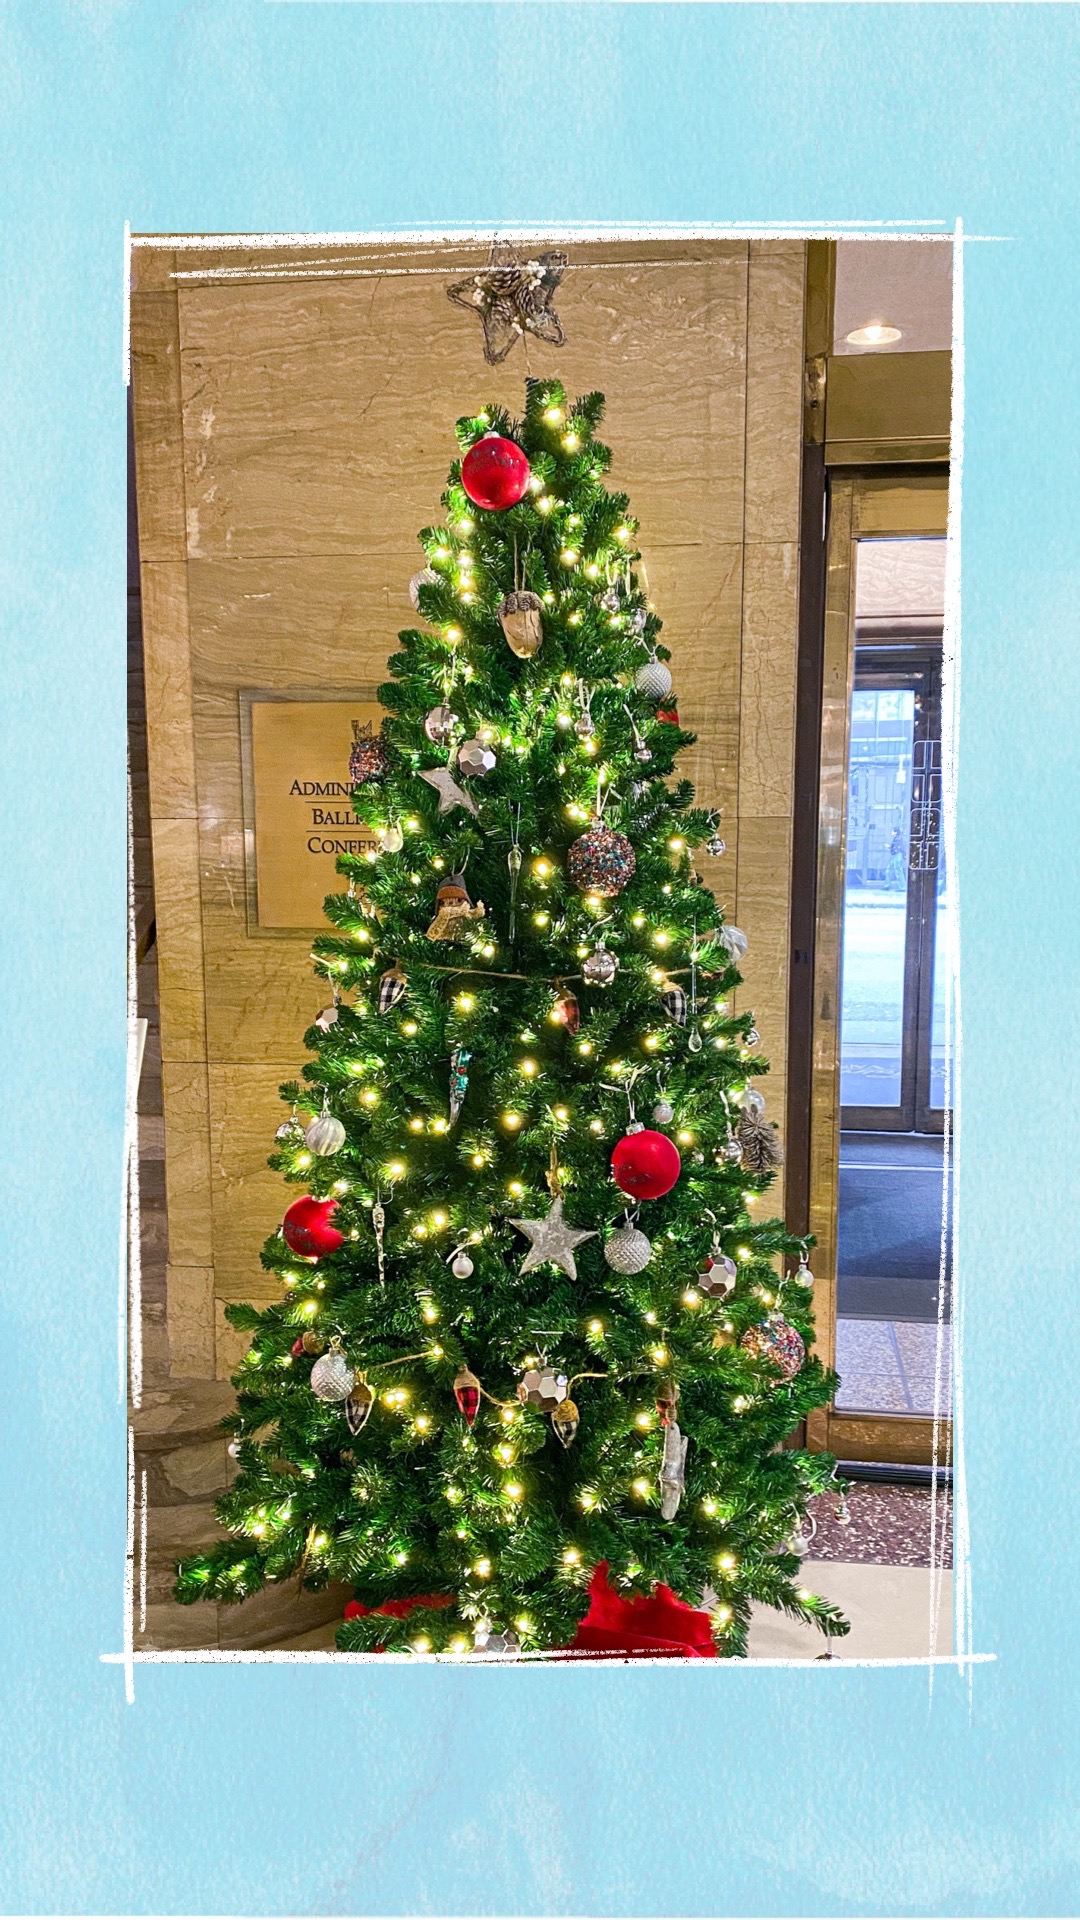 A holiday tree decorated with red and silver ornaments for the BCCHF Festival of Trees